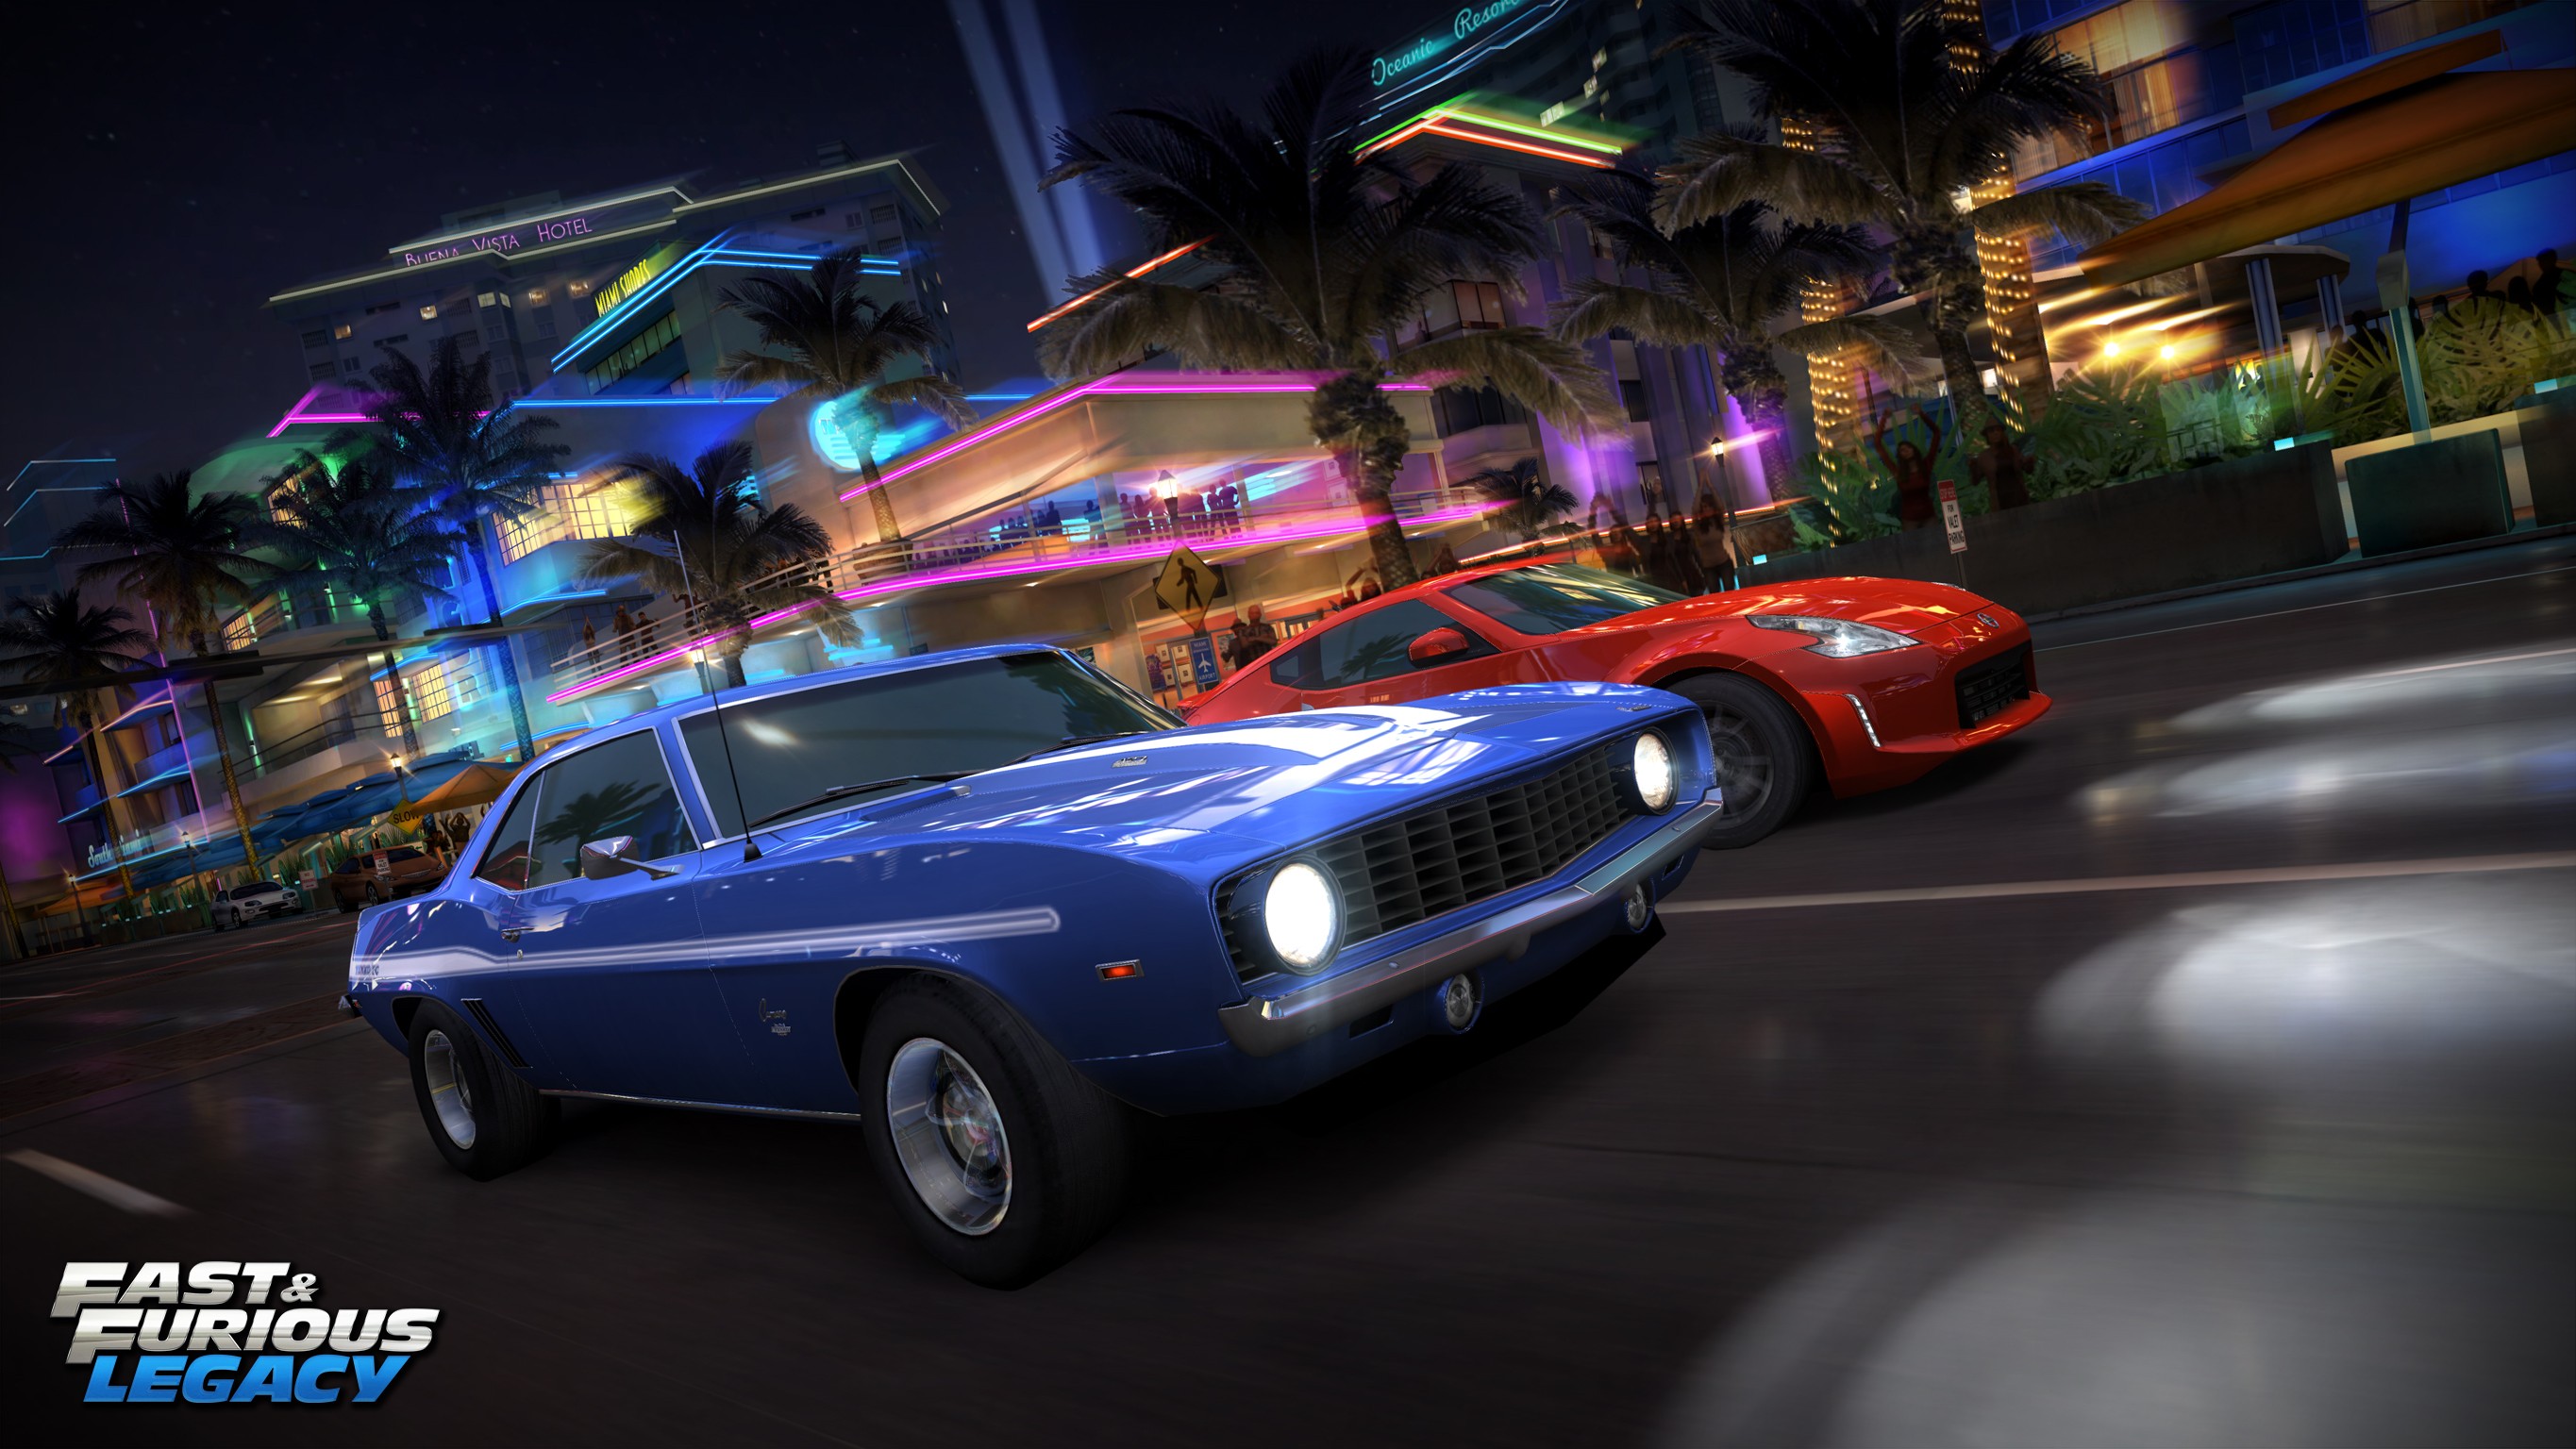 Fast And Furious, Fast And Furious: Legacy, Video Games, IOS Wallpapers HD / Desktop ...2730 x 1536